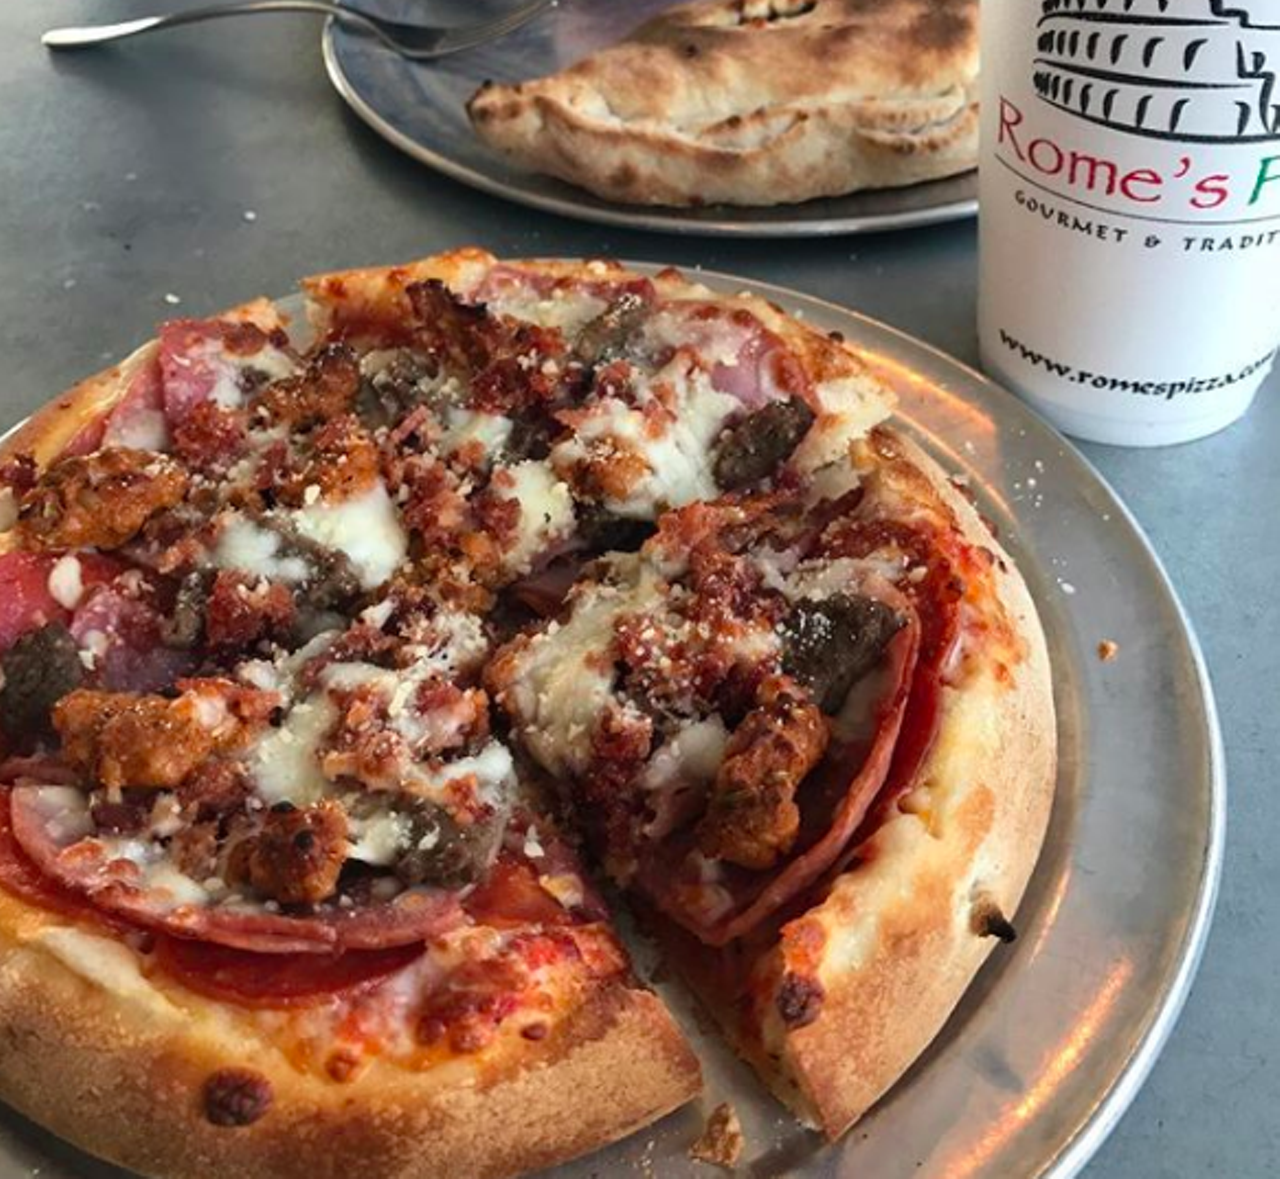 Rome’s Pizza
Multiple locations, romespizza.com
On Tuesdays and Wednesdays, kids will be able to enjoy some free ‘za with the purchase of an adult meal. How cool is that?!
Photo via Instagram / sakurasenpai420